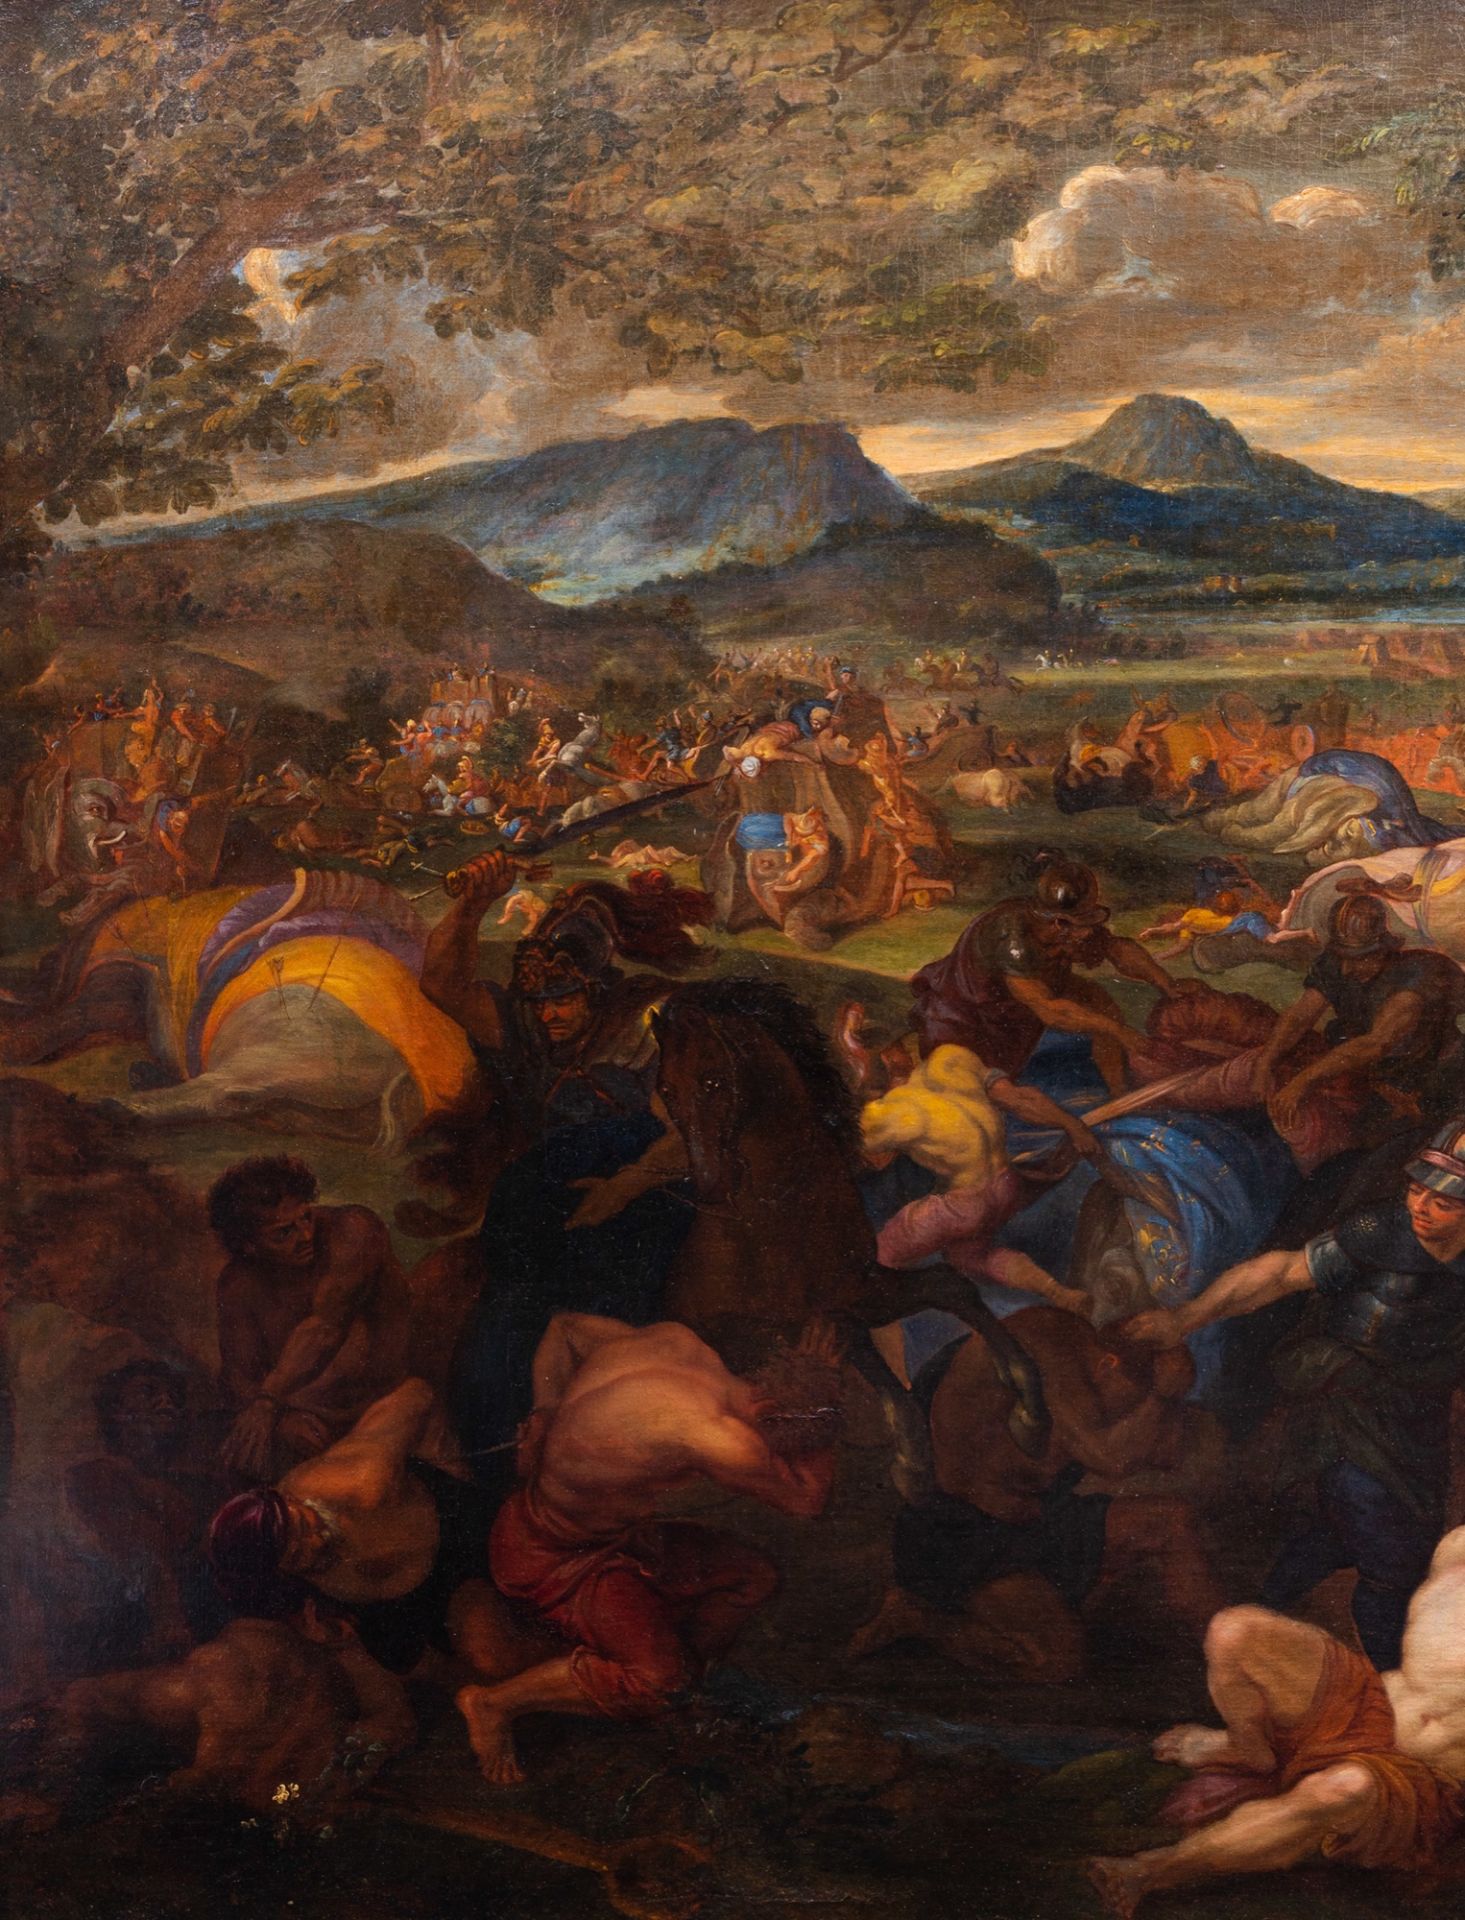 French school, workshop of Charles le Brun (1619-1690): Alexander and Poros in the Battle of Hydaspe - Image 9 of 24